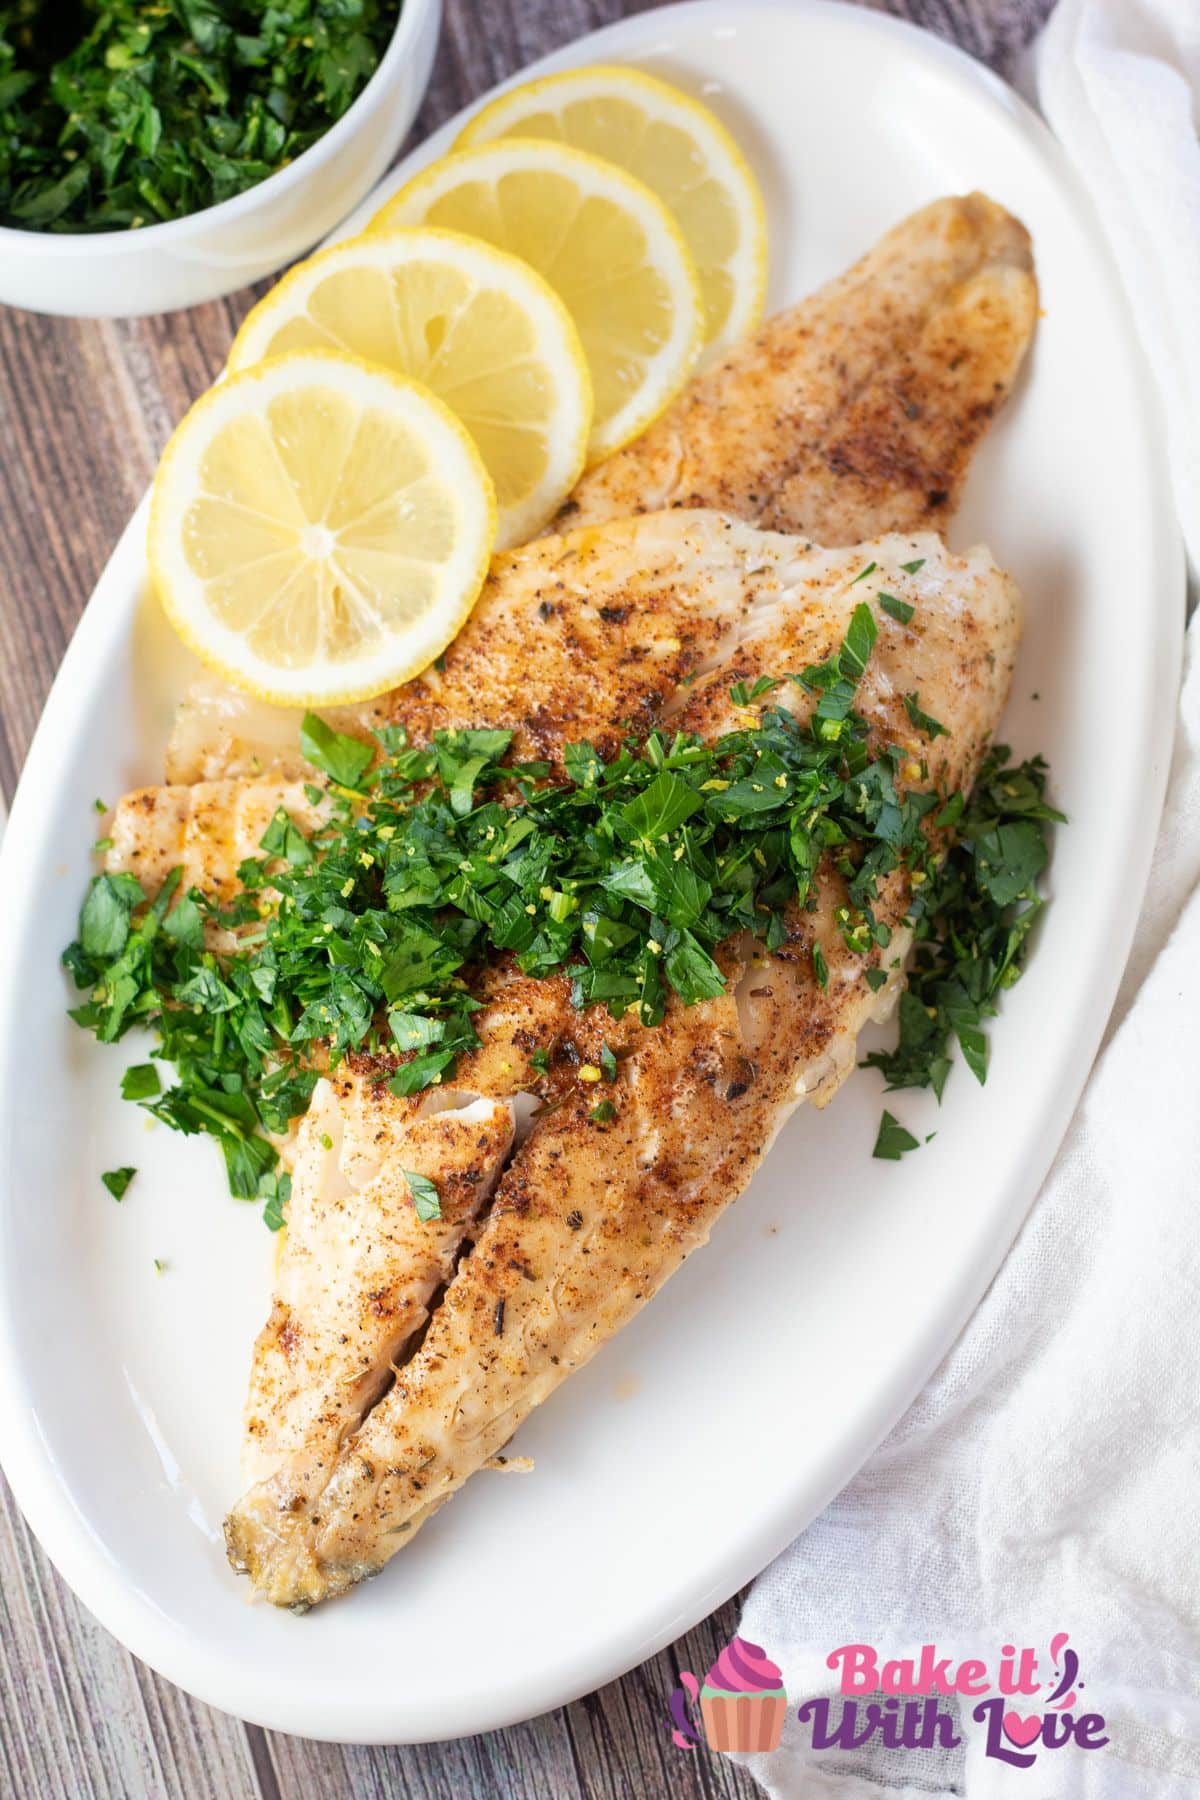 Tall image of branzino with gremolata and lemon slices on a white serving plate.